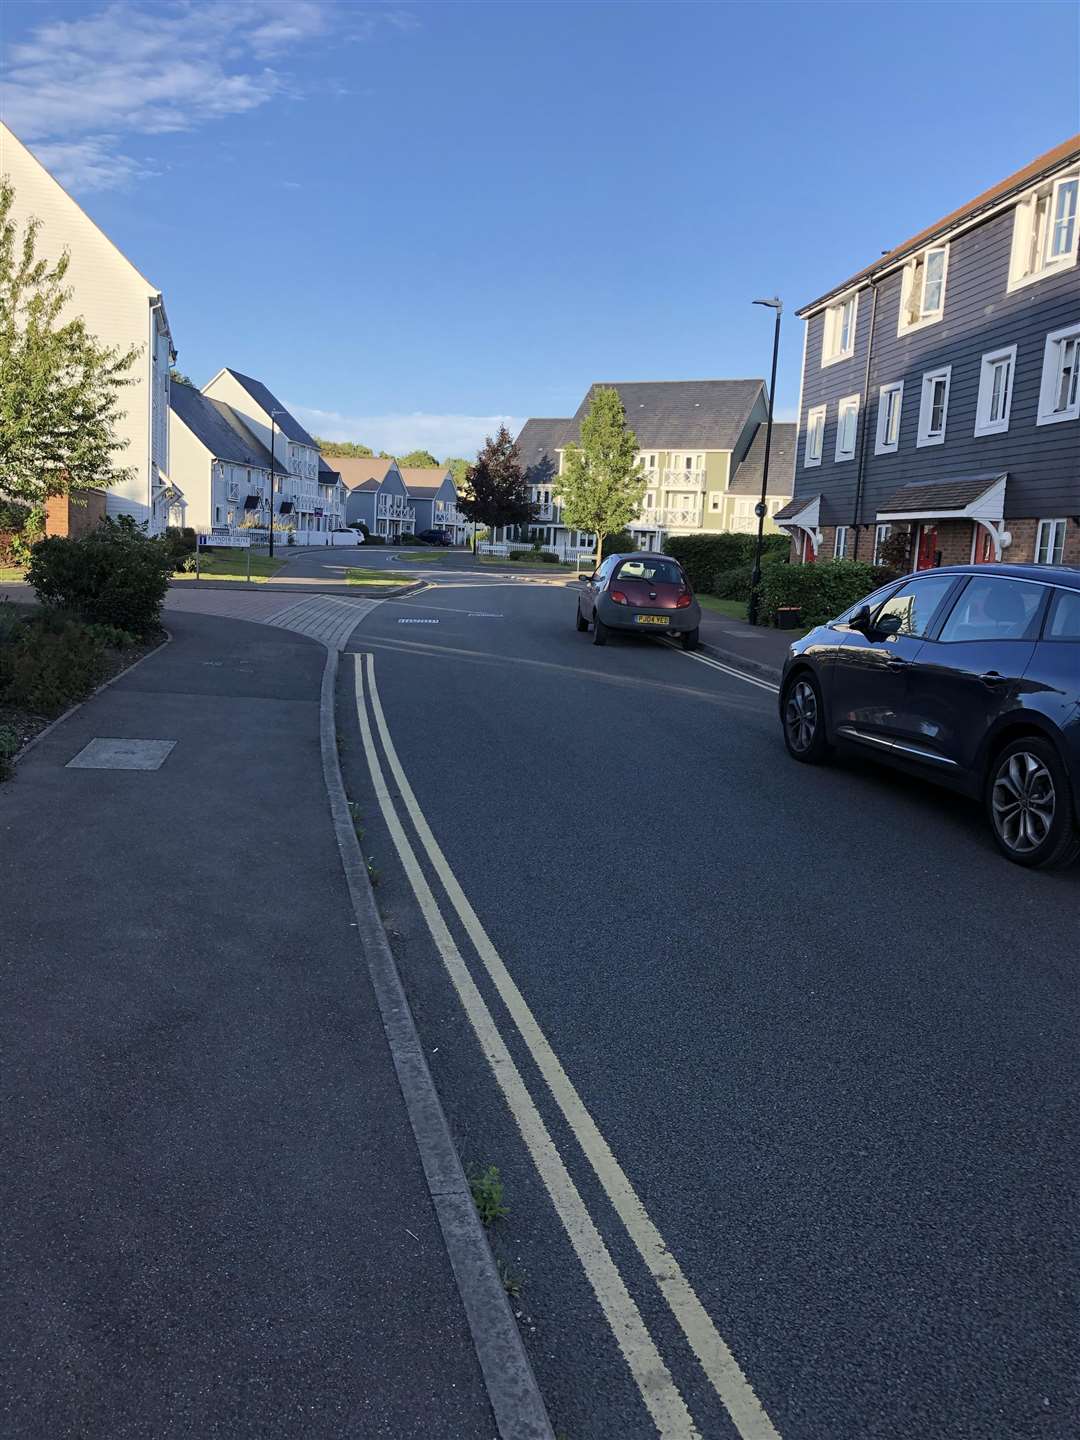 Residents have been warned by Tonbridge and Malling council that the double yellow lines on the Holborough Lakes development are to be enforced from September 1